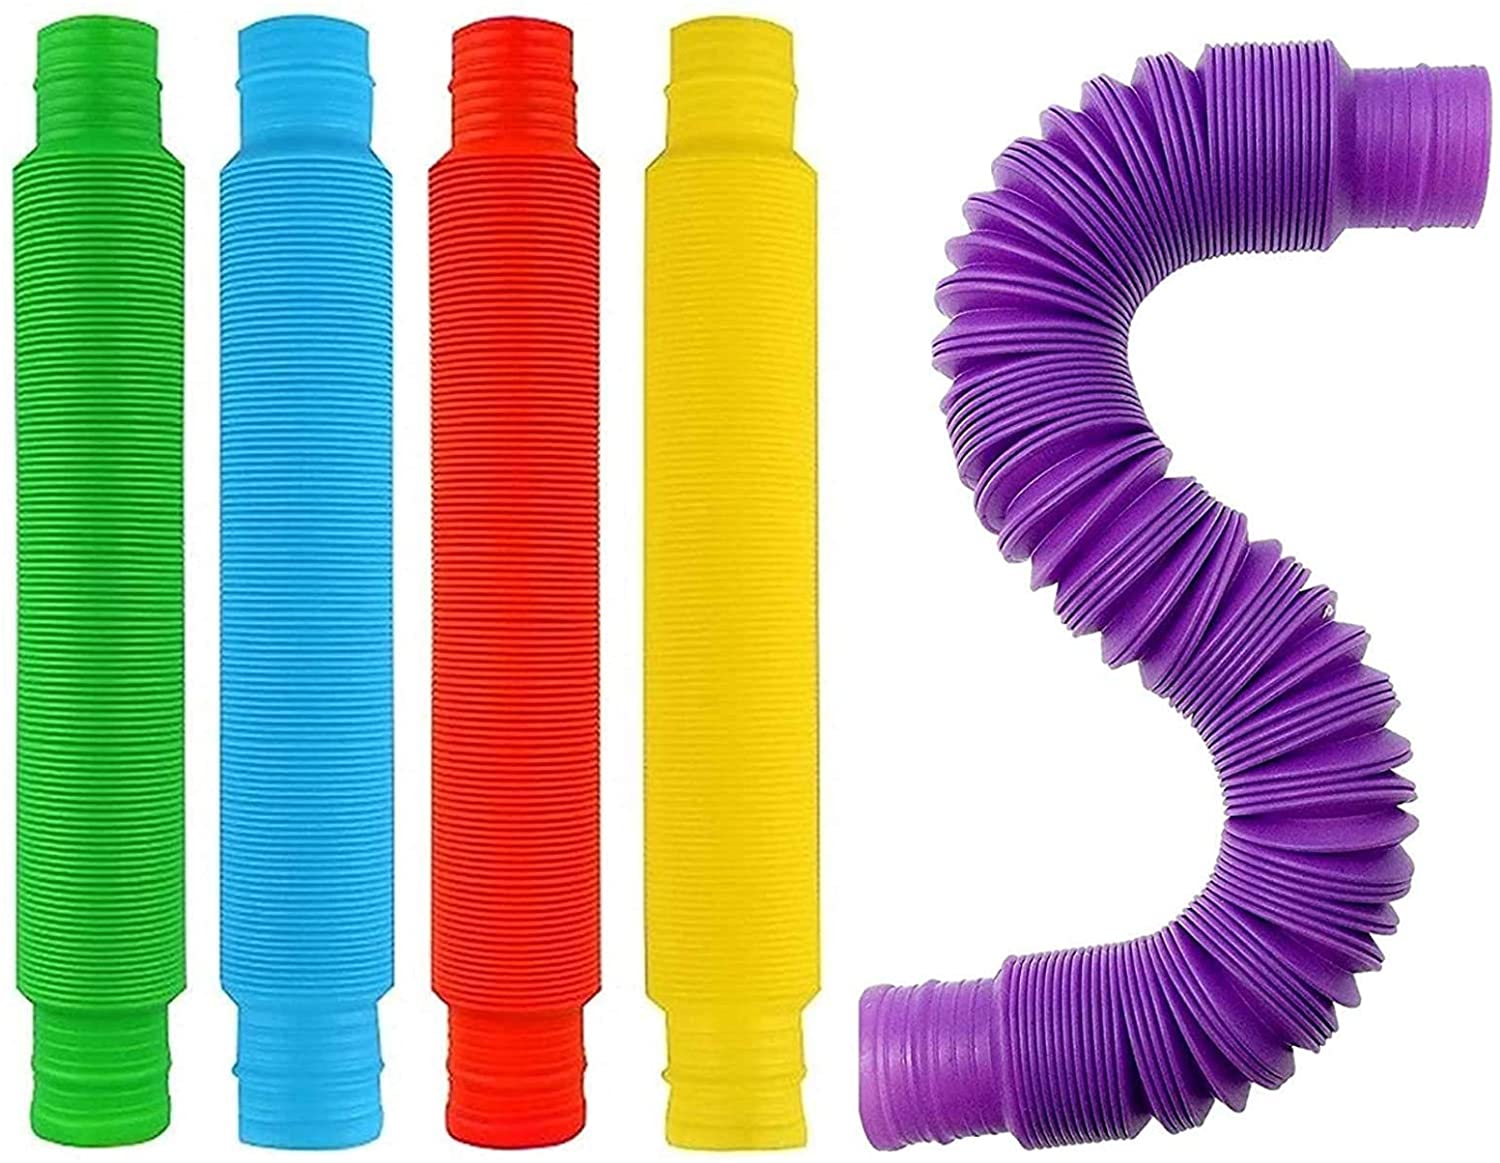 Learning Toys Pop Tubes Sensory Toys 5 Stretches Up to 18 by Playkidz Fine Motor Skills Toddler Toys Thin Fidget Sensory Toys for Kids and Adults 4 Pack 